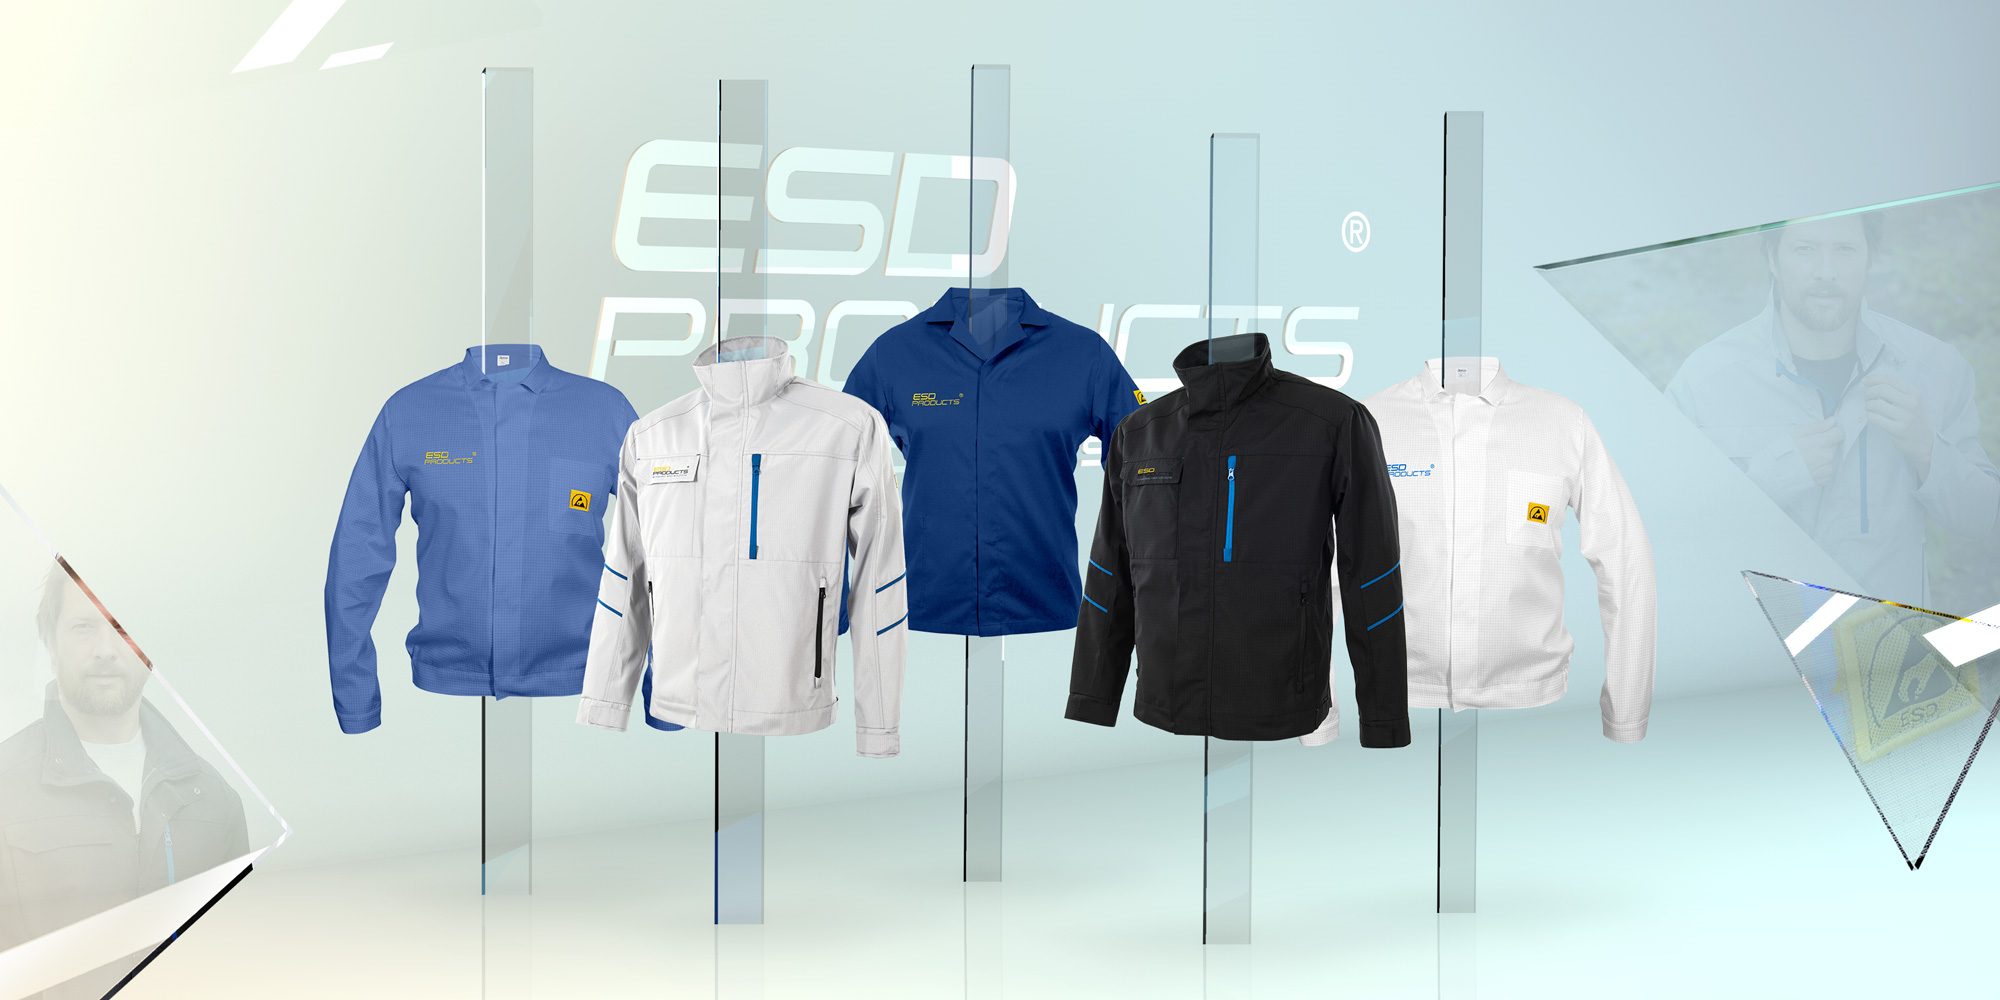 Aes_ESD-Clothing-anti-Static-Garments-Jackets-ESD-Static-safe-Apparel-esd_products